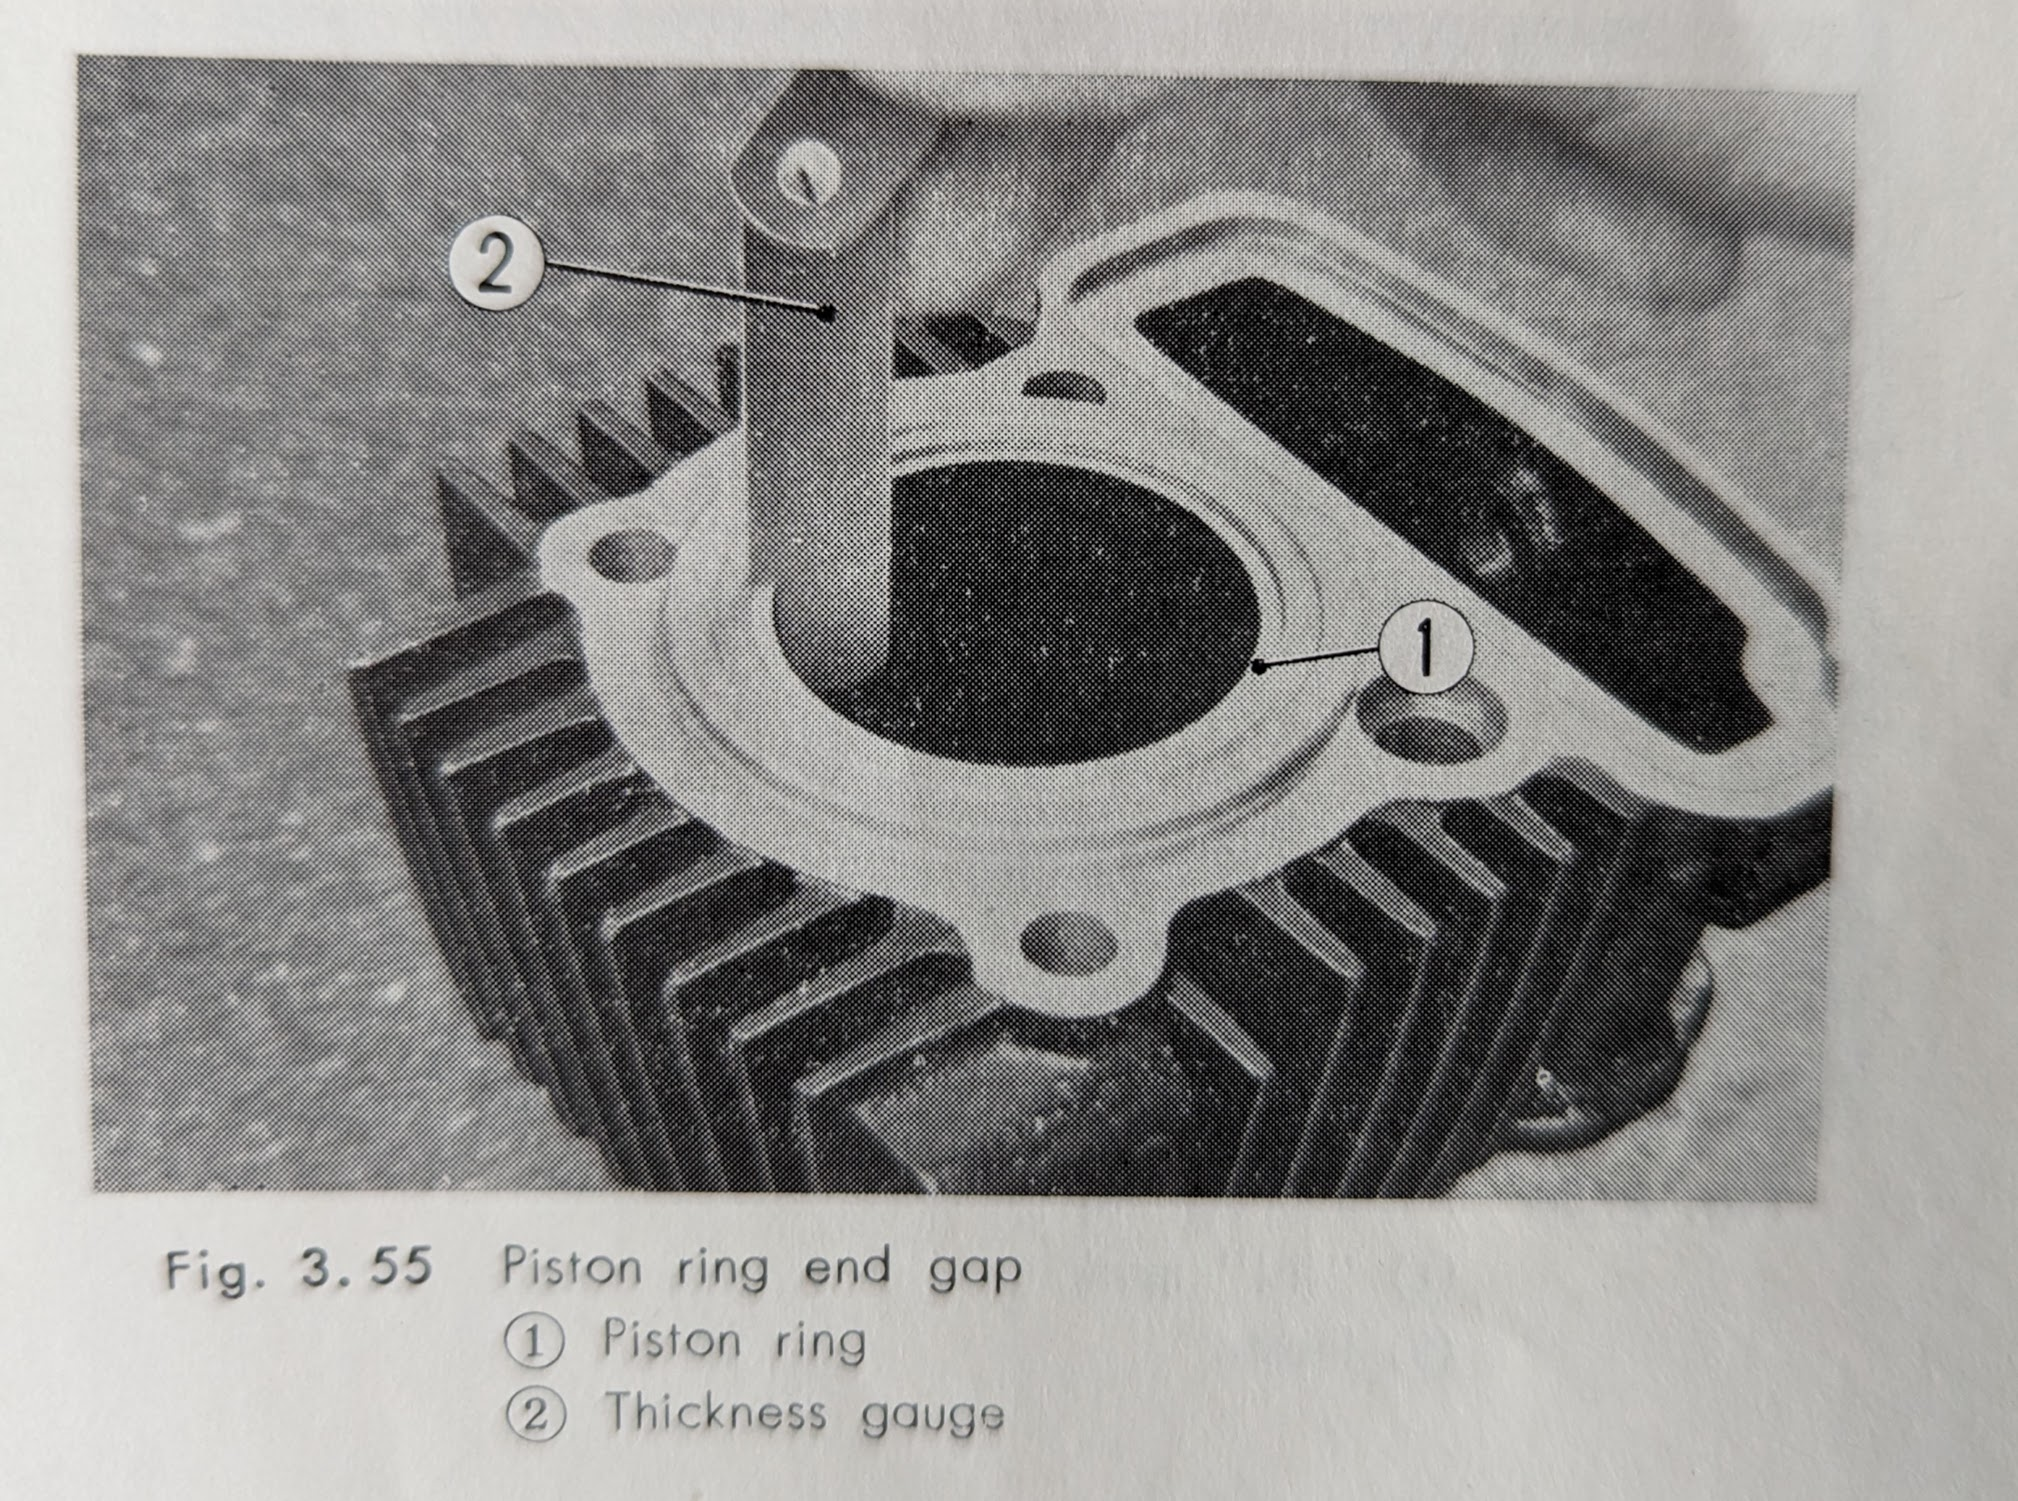 Honda C90 - piston, cylinder and combustion